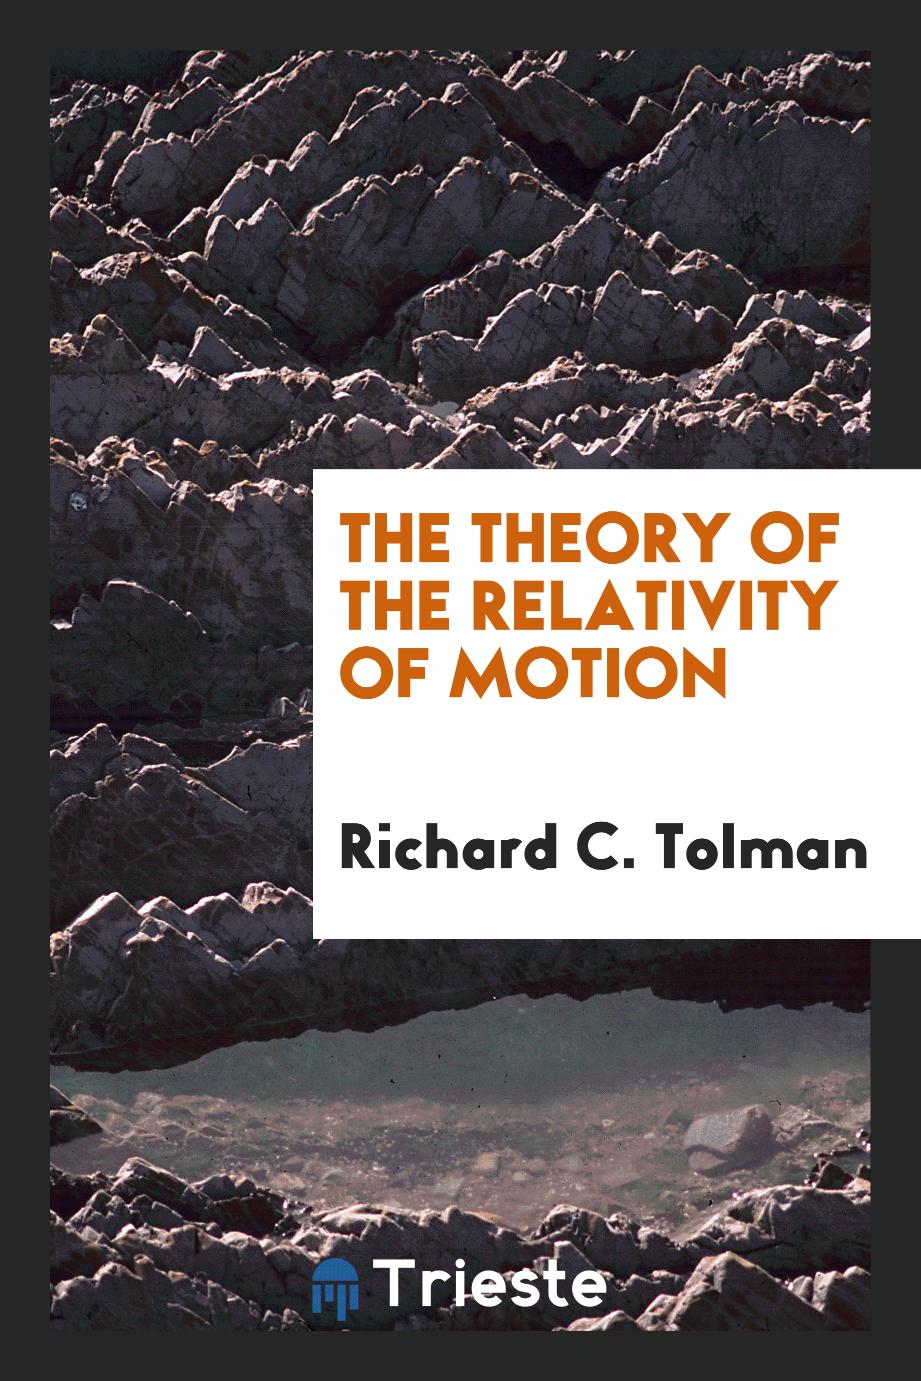 The theory of the relativity of motion